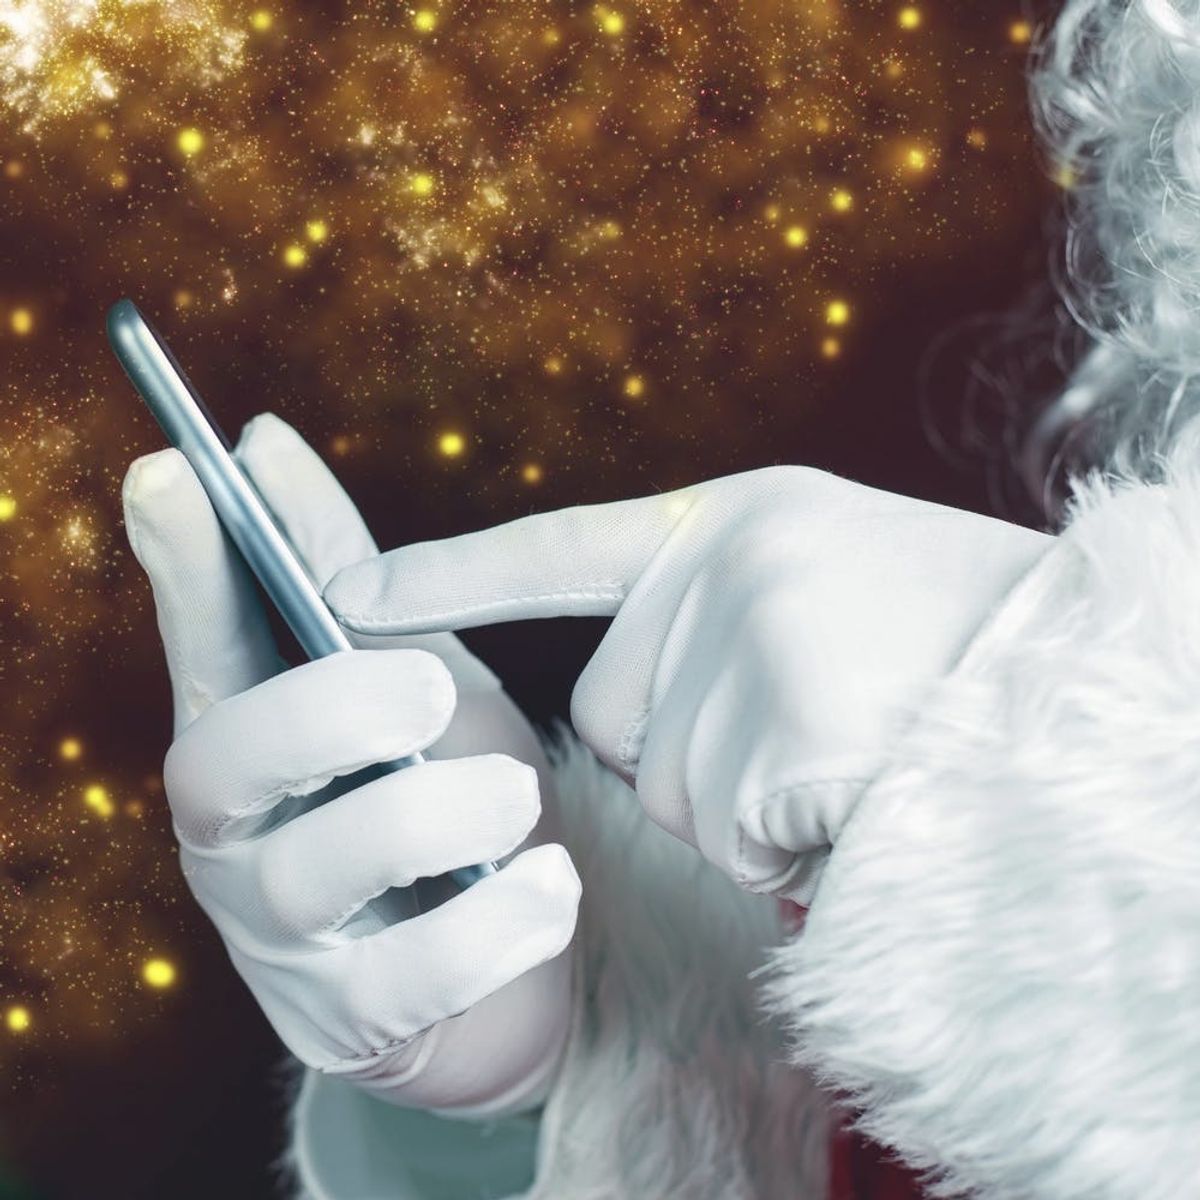 You Can Schedule a Phone Call With Santa’s Elves